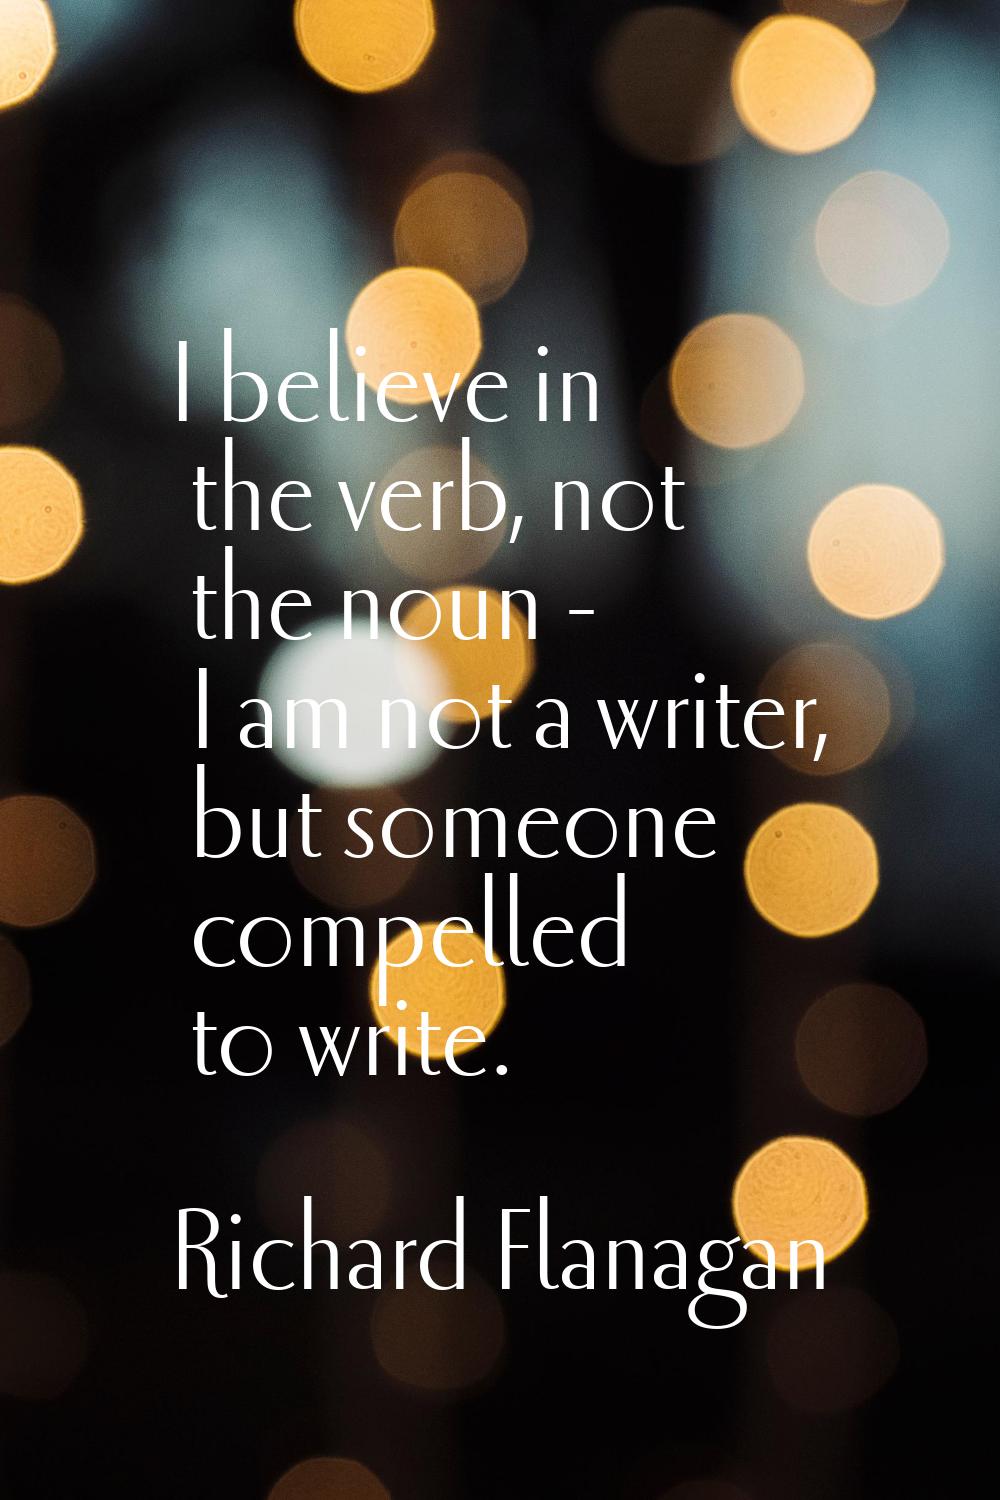 I believe in the verb, not the noun - I am not a writer, but someone compelled to write.